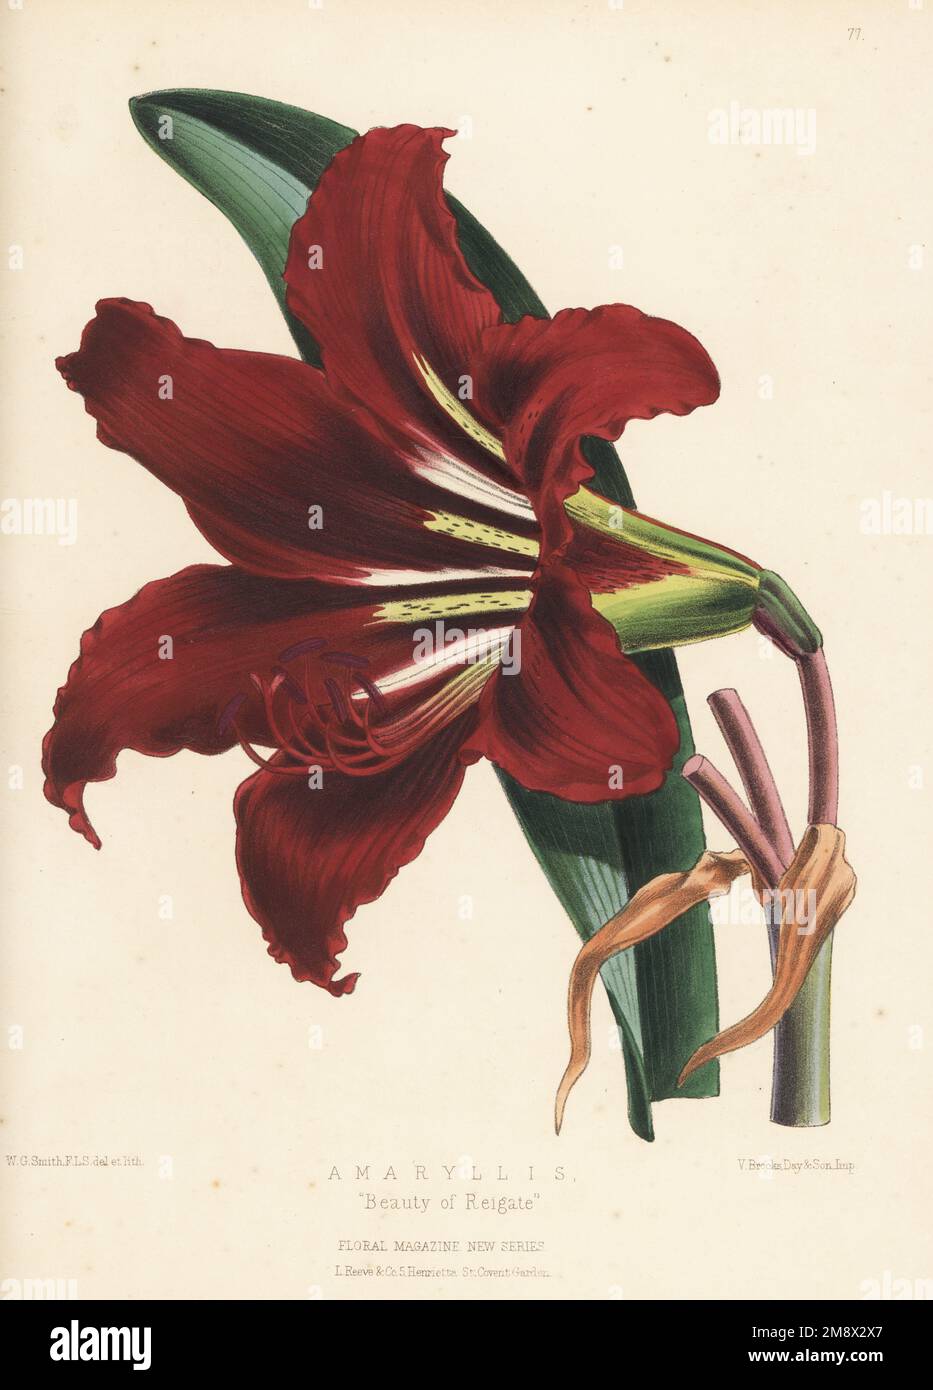 Amaryllis hybrid, Beauty of Reigate. Hybrid raised by Mr Brown, gardener to A. J. Waterlow of Reigate. Handcolored botanical illustration drawn and lithographed by Worthington George Smith from Henry Honywood Dombrain's Floral Magazine, New Series, Volume 2, L. Reeve, London, 1873. Lithograph printed  by Vincent Brooks, Day & Son. Stock Photo